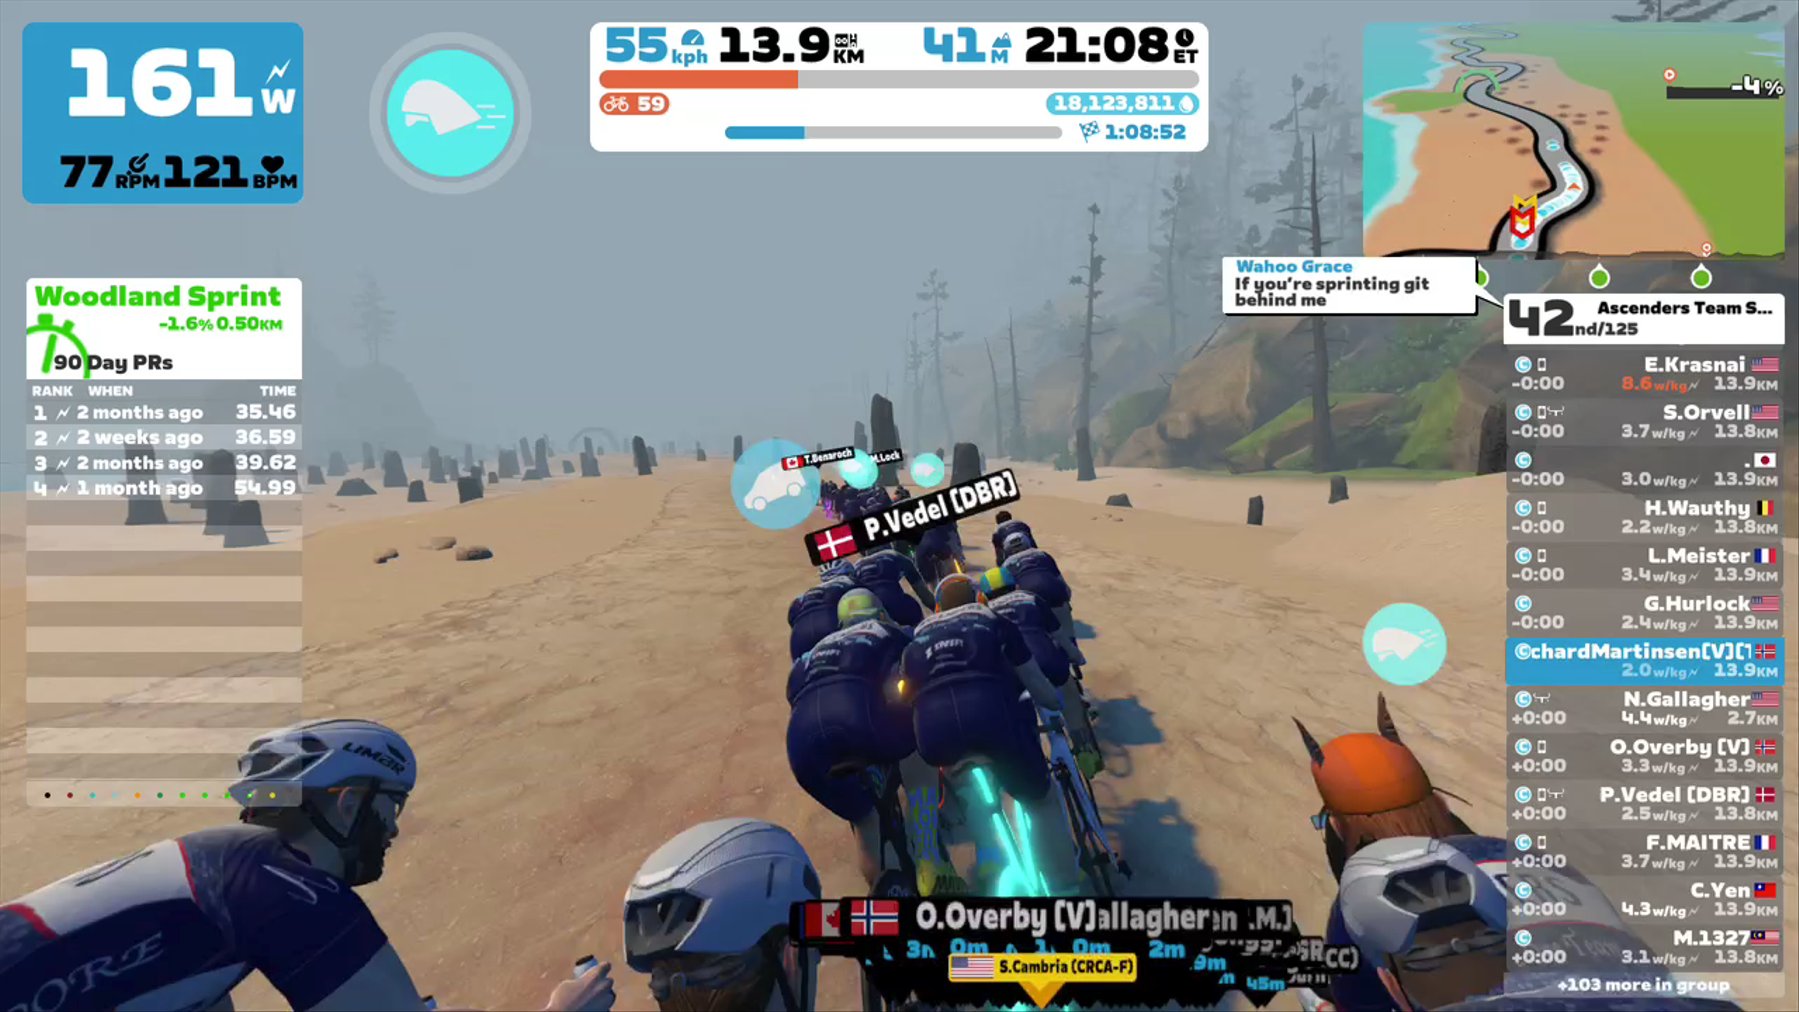 Zwift - Group Ride: Ascenders Team Social Thursday Rides (C) on The Big Ring in Watopia